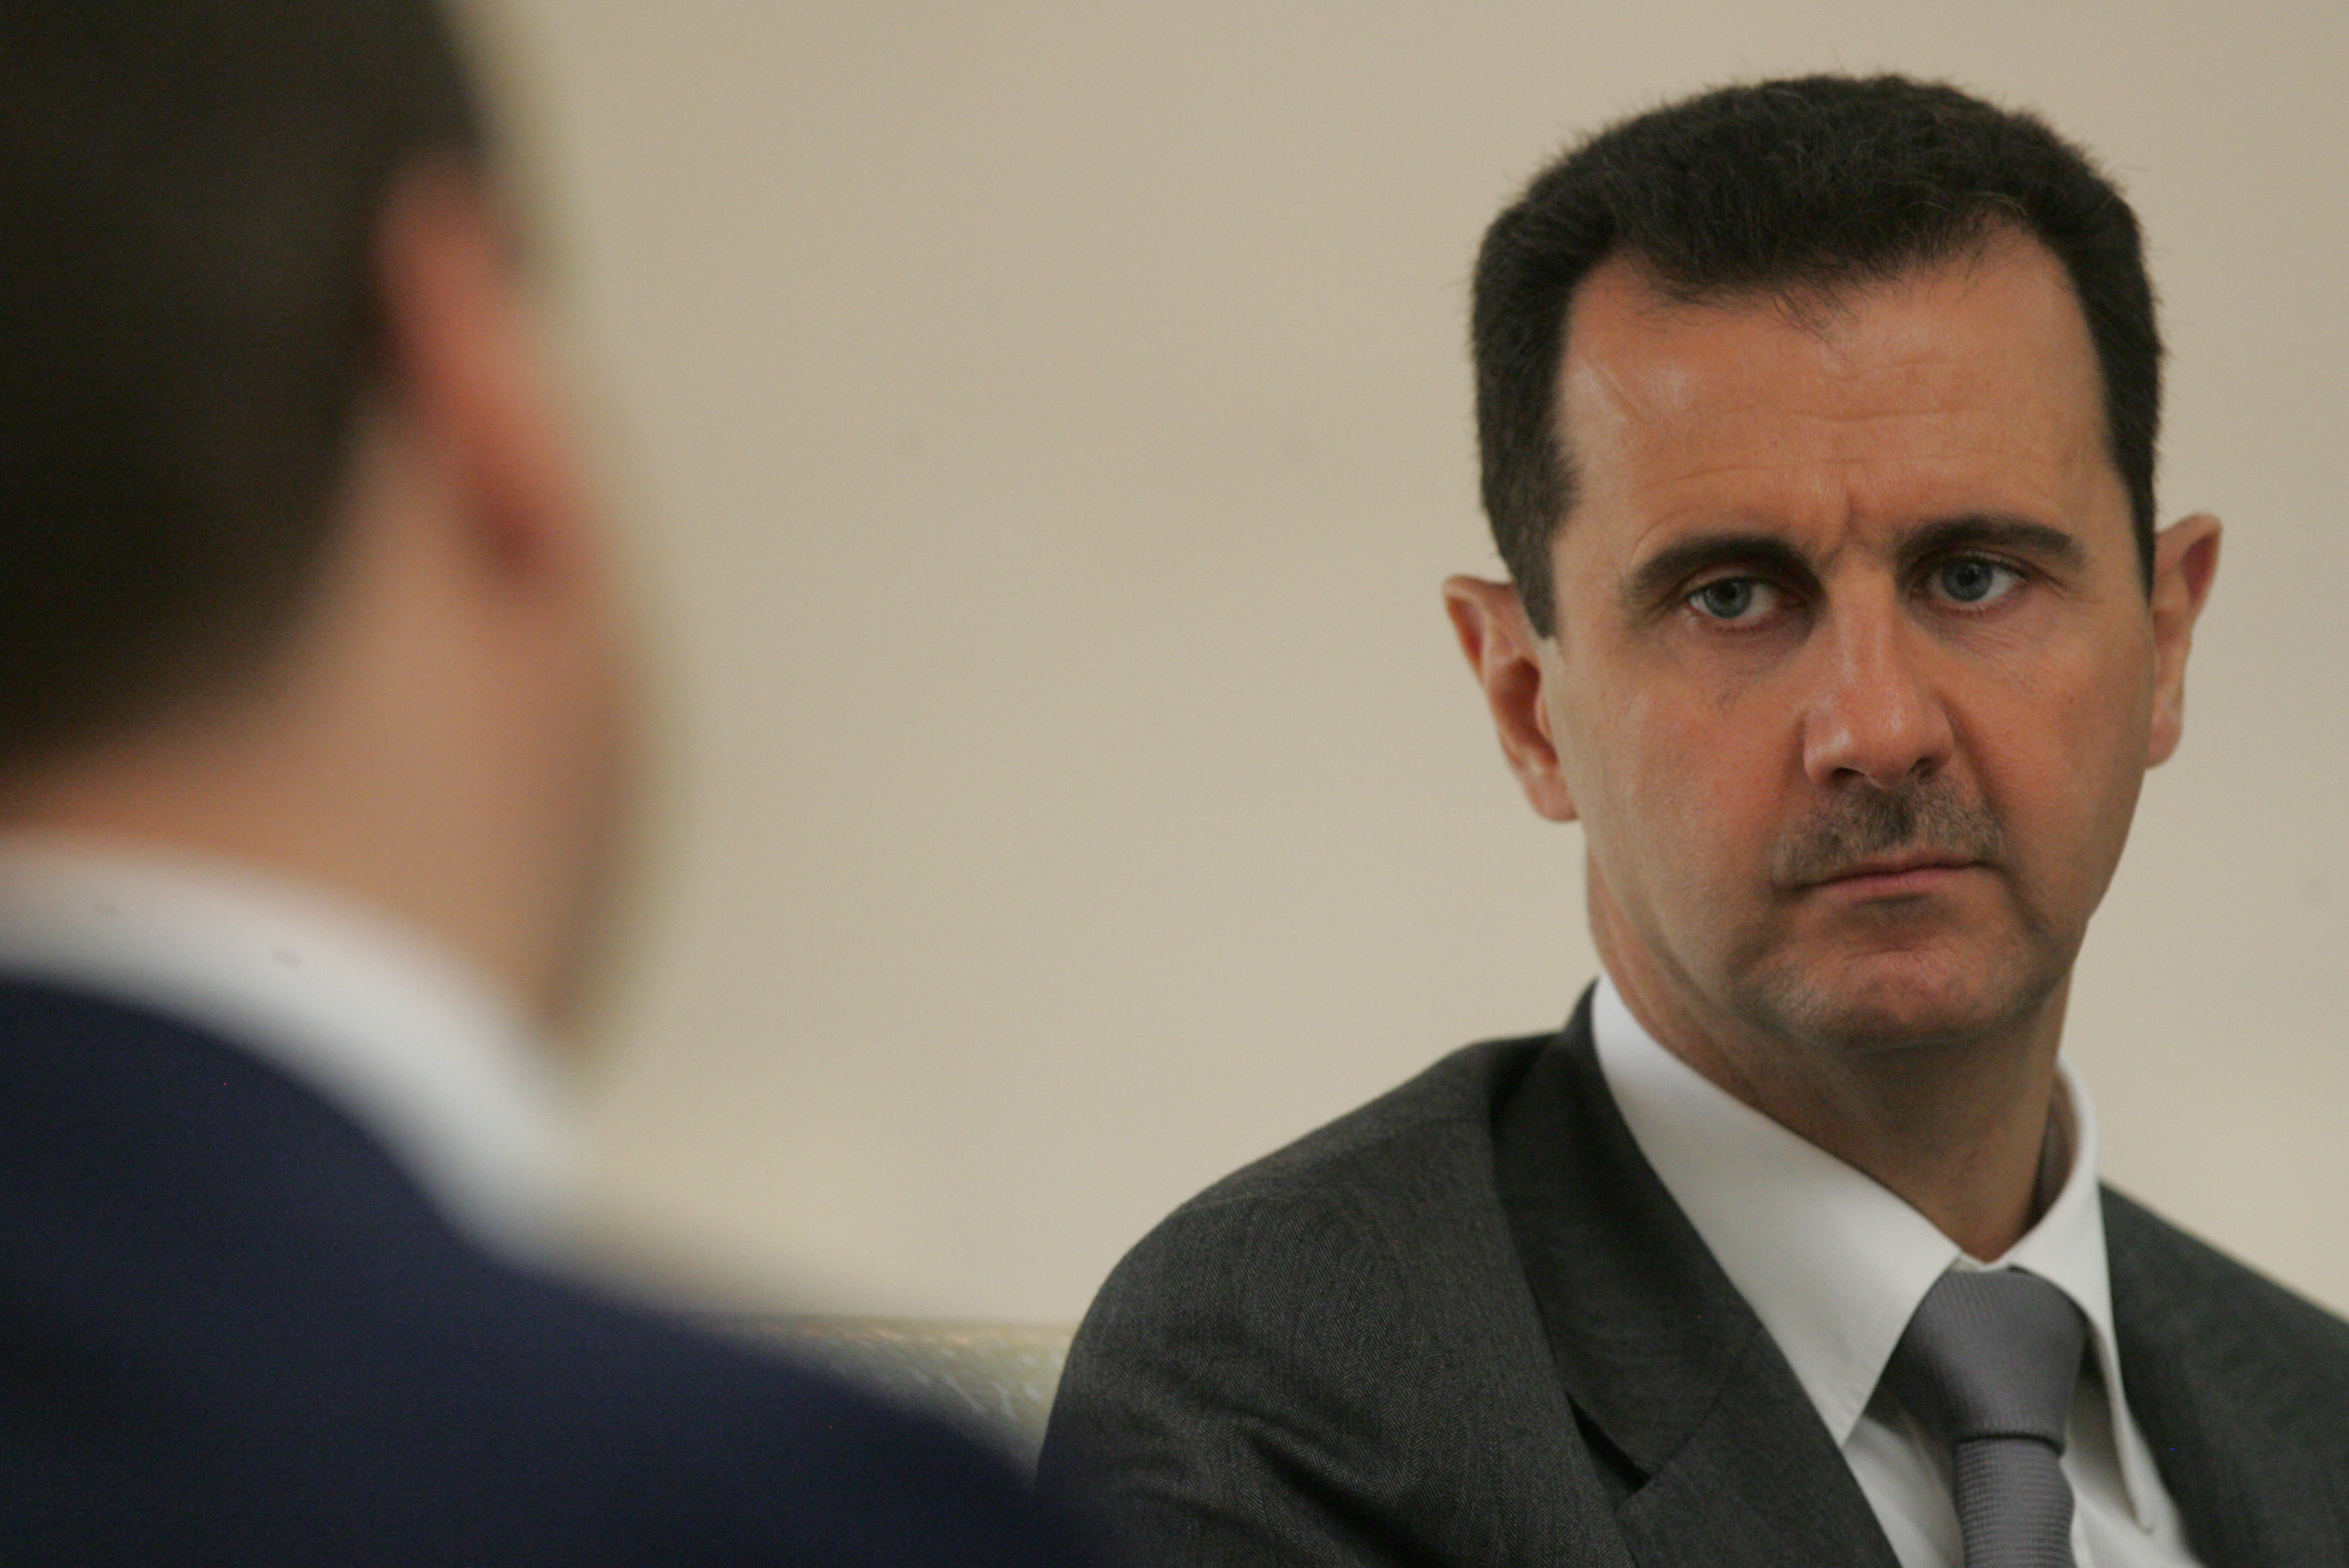 Bashar Assad in Damascus, Syria in 2010. (Sasha Mordovets—Getty Images)